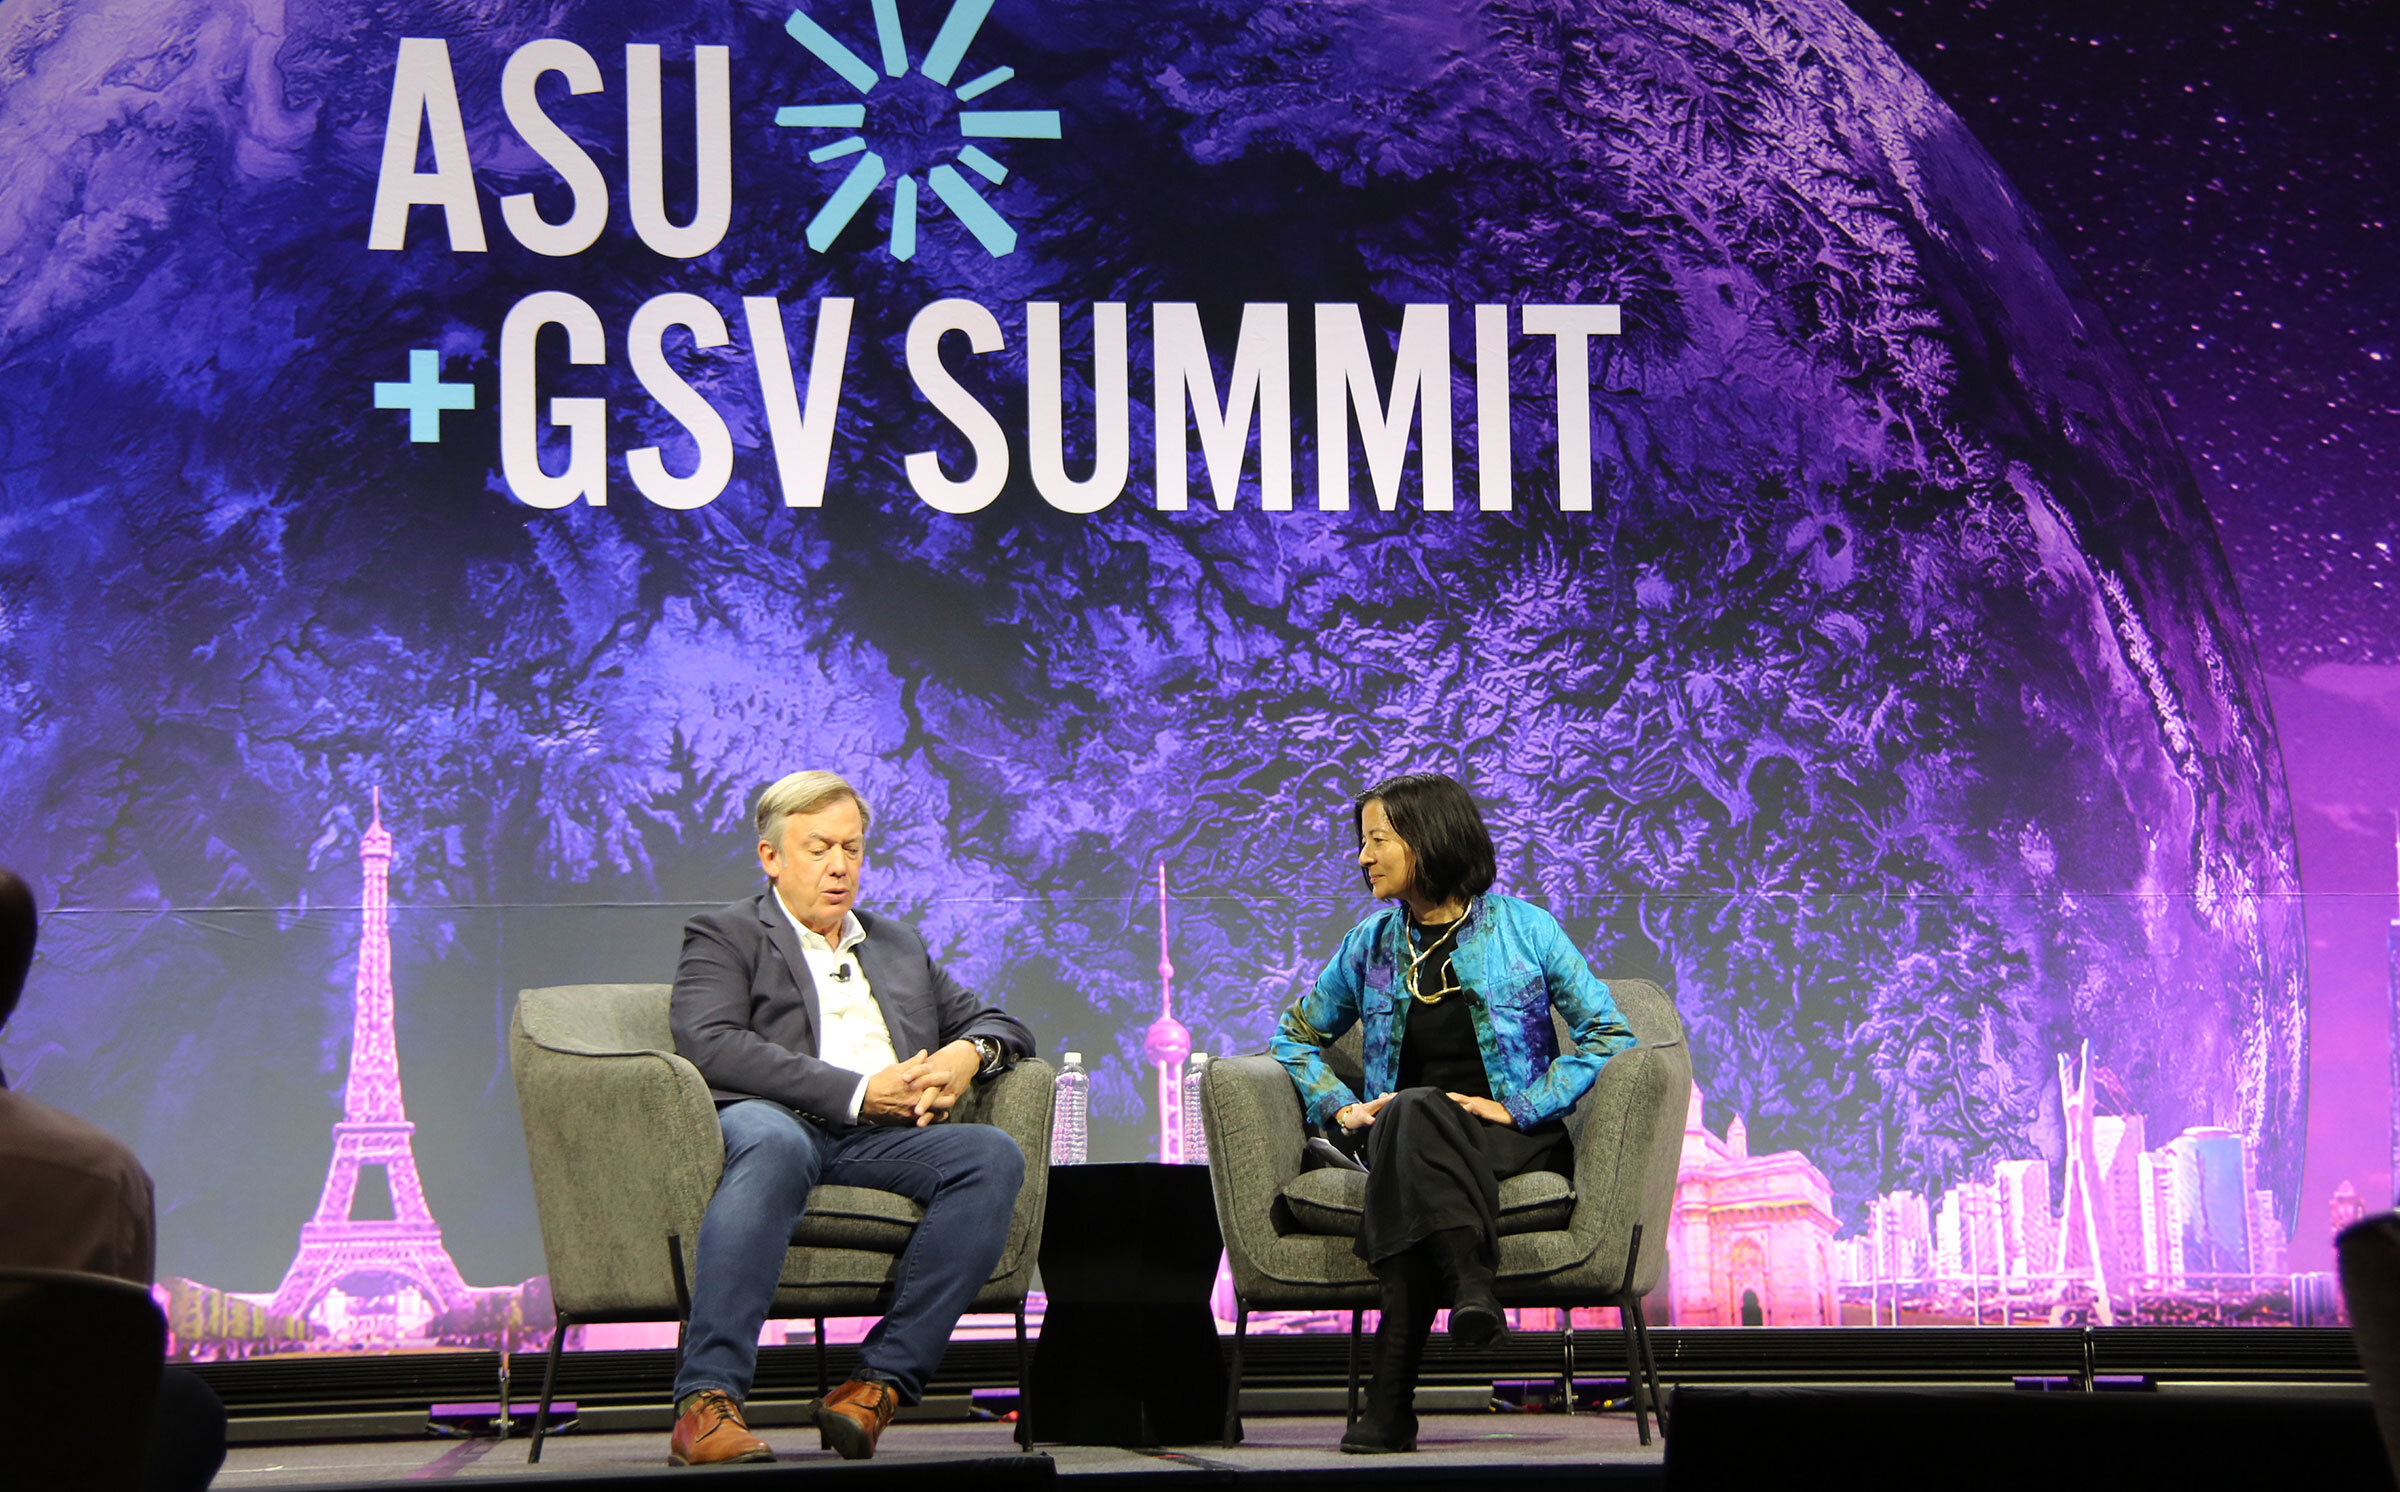 Man and woman sitting on stage talking at ASU+GSV Summit